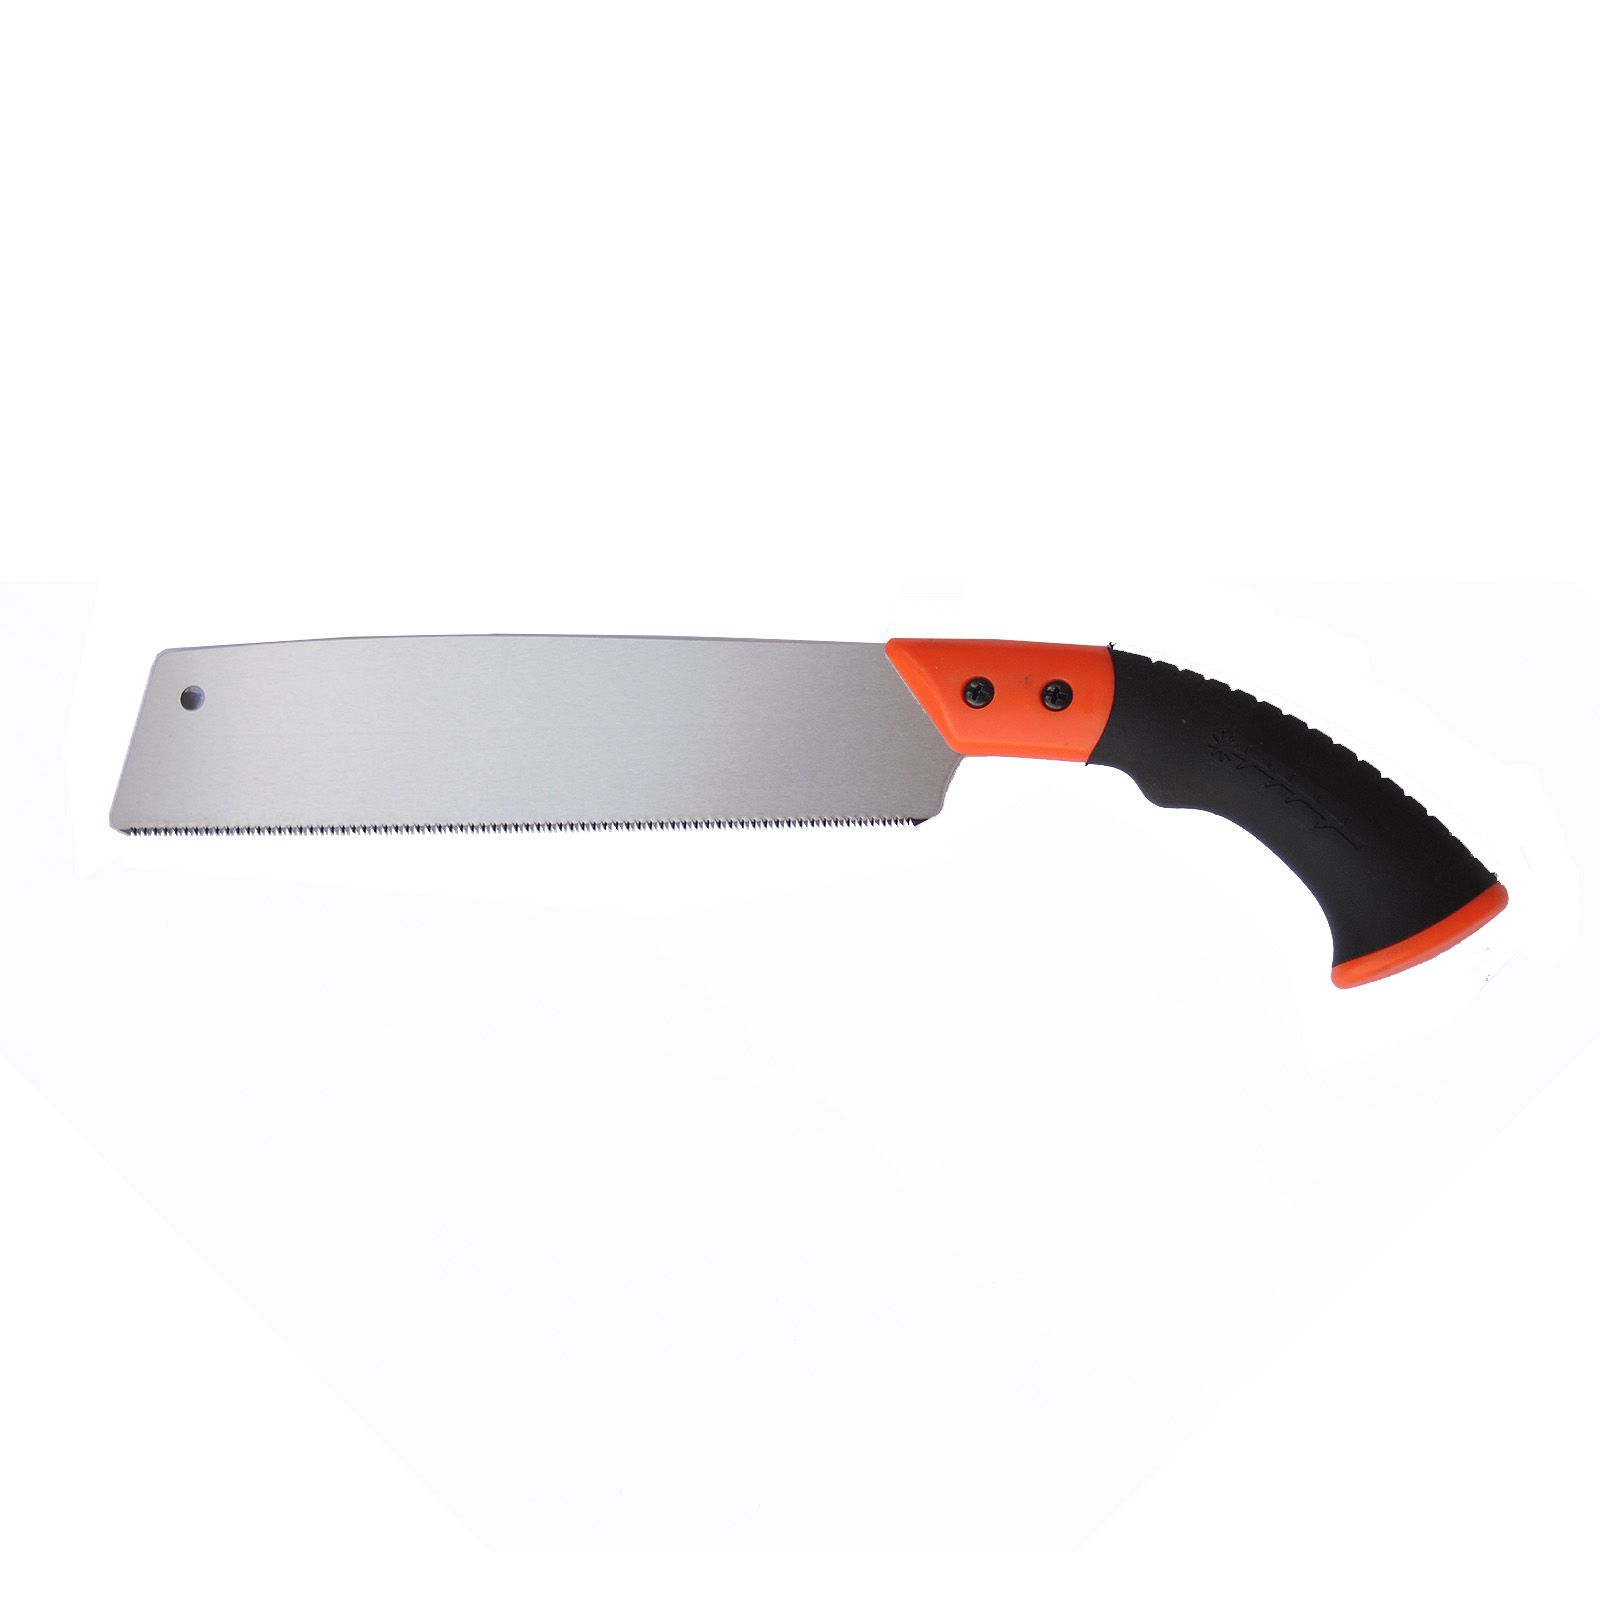 10.5inch (265mm) Fixed Blade Japanese Saw | Master Precision